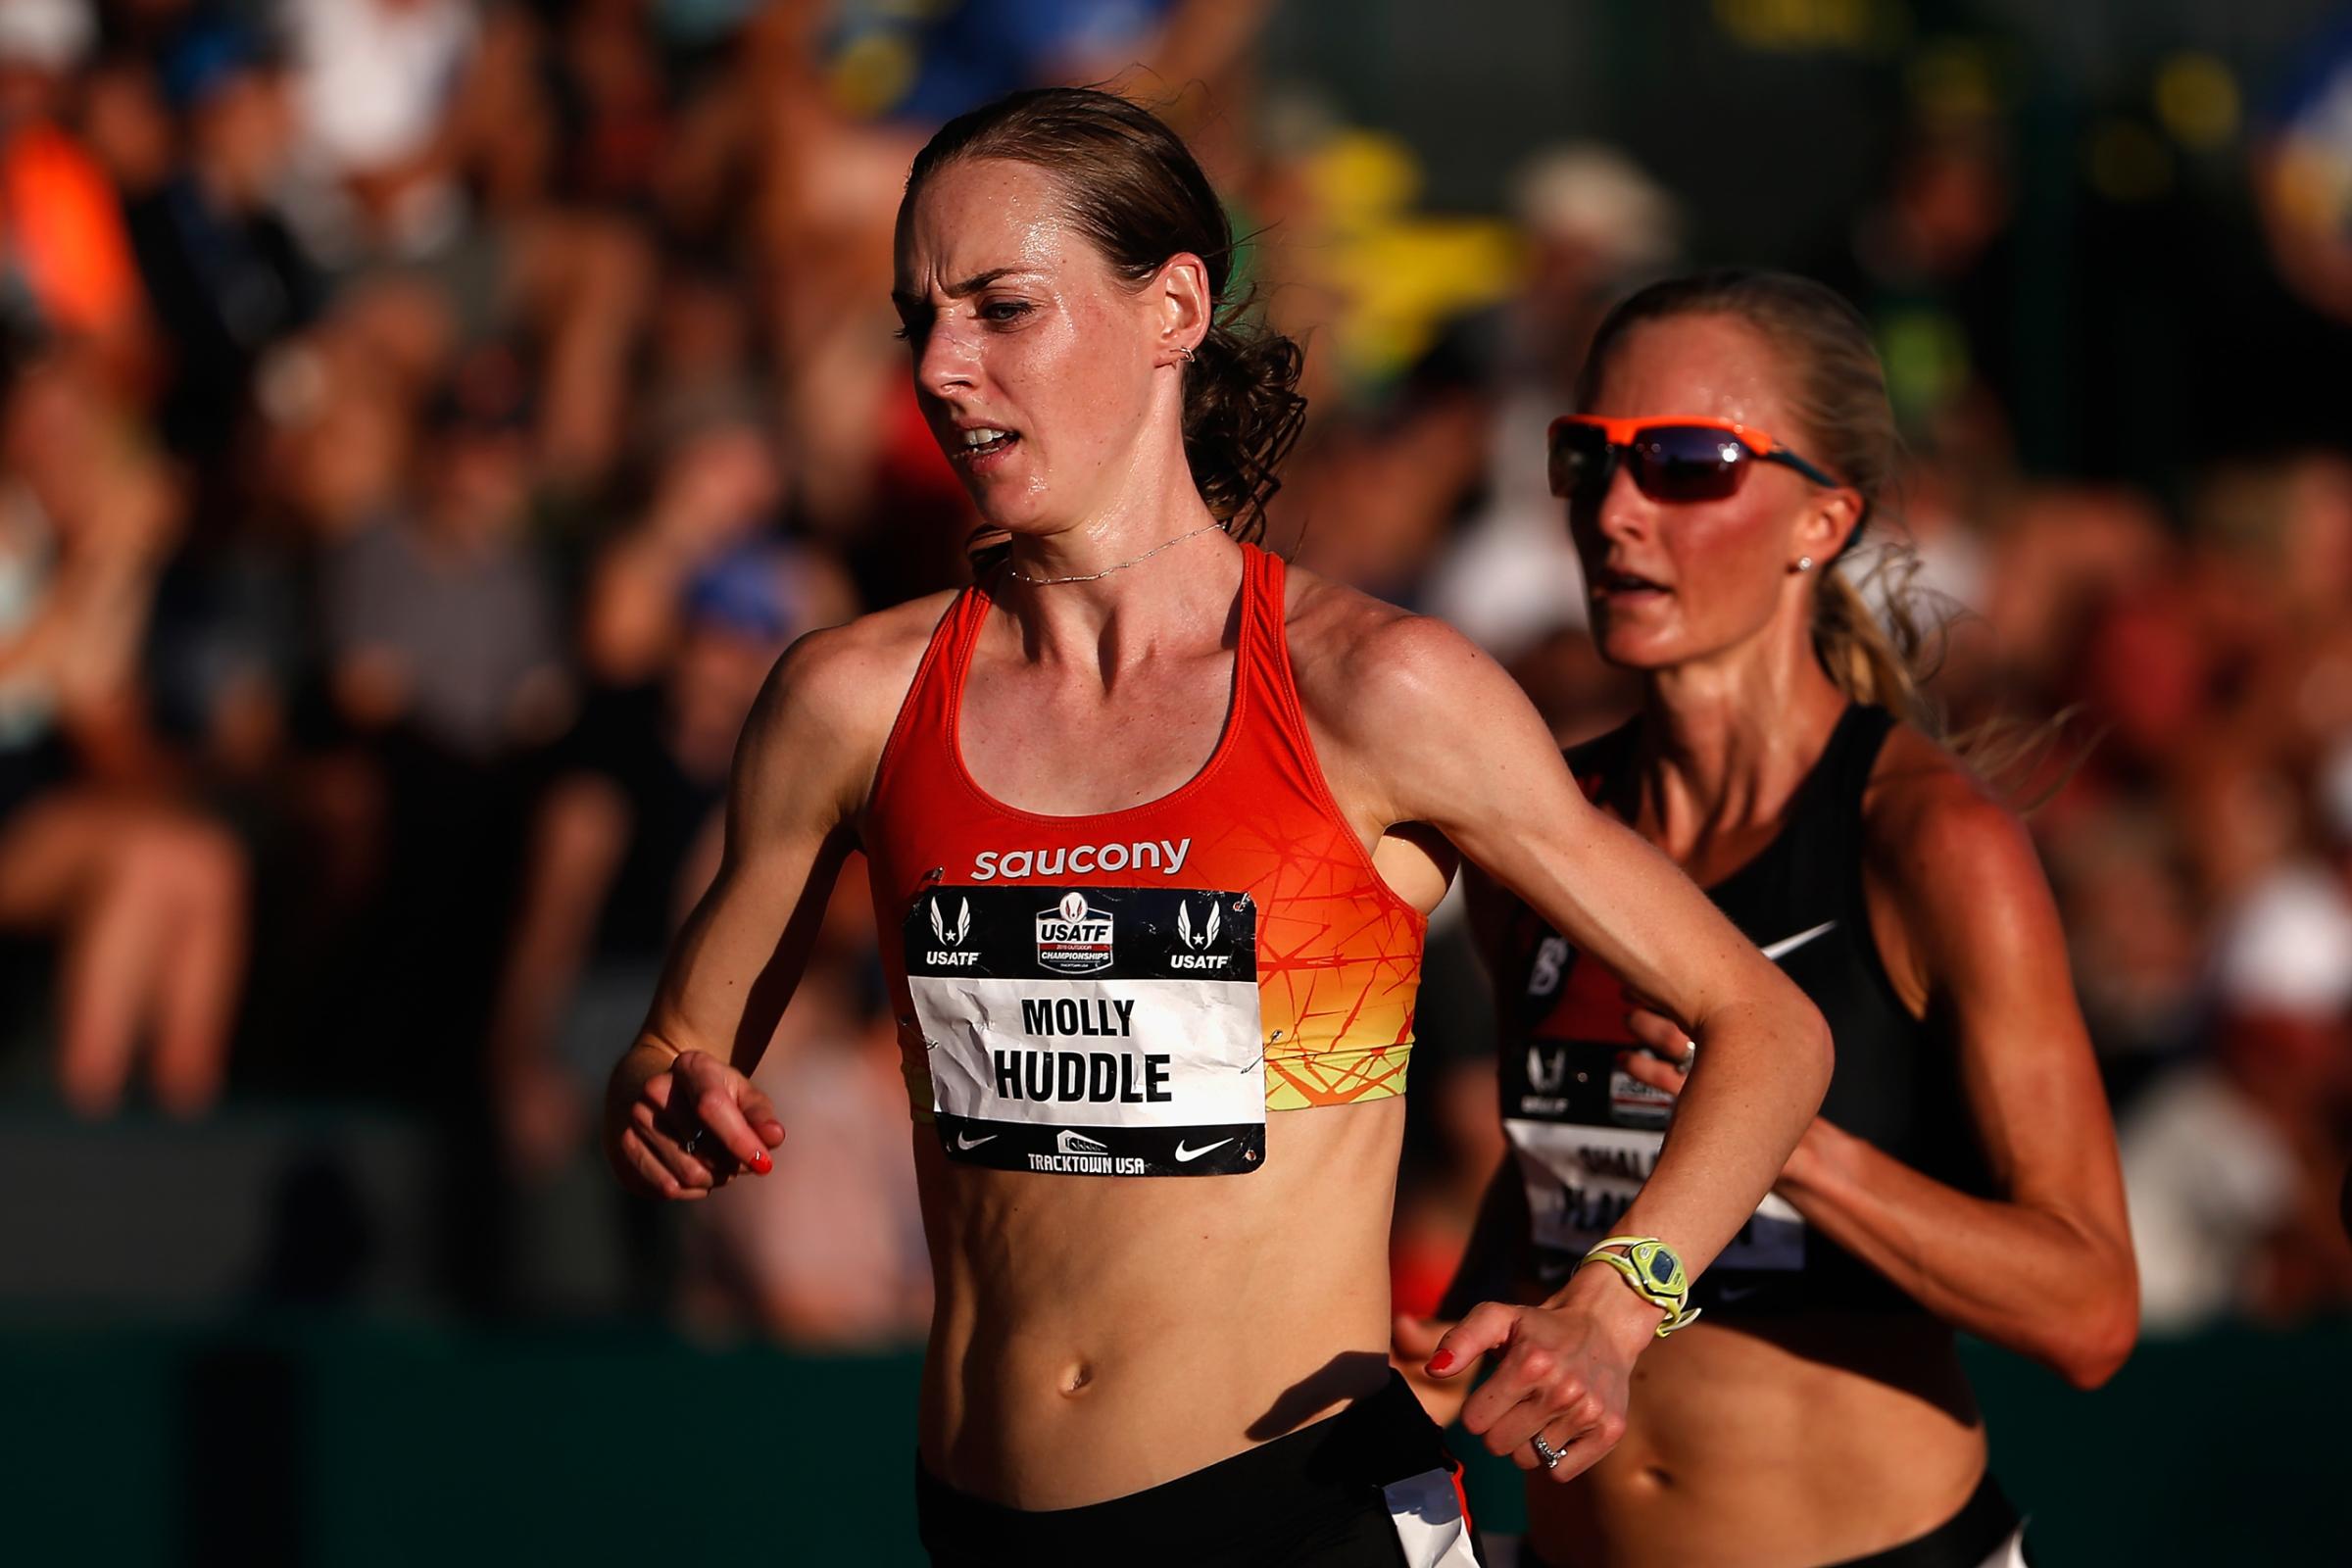 Molly Huddle—Huddle won both the 5,000 m and 10,000 m at U.S. trials, but will only run the 10,000 in Rio, where she could be just the third American woman to medal in that event.